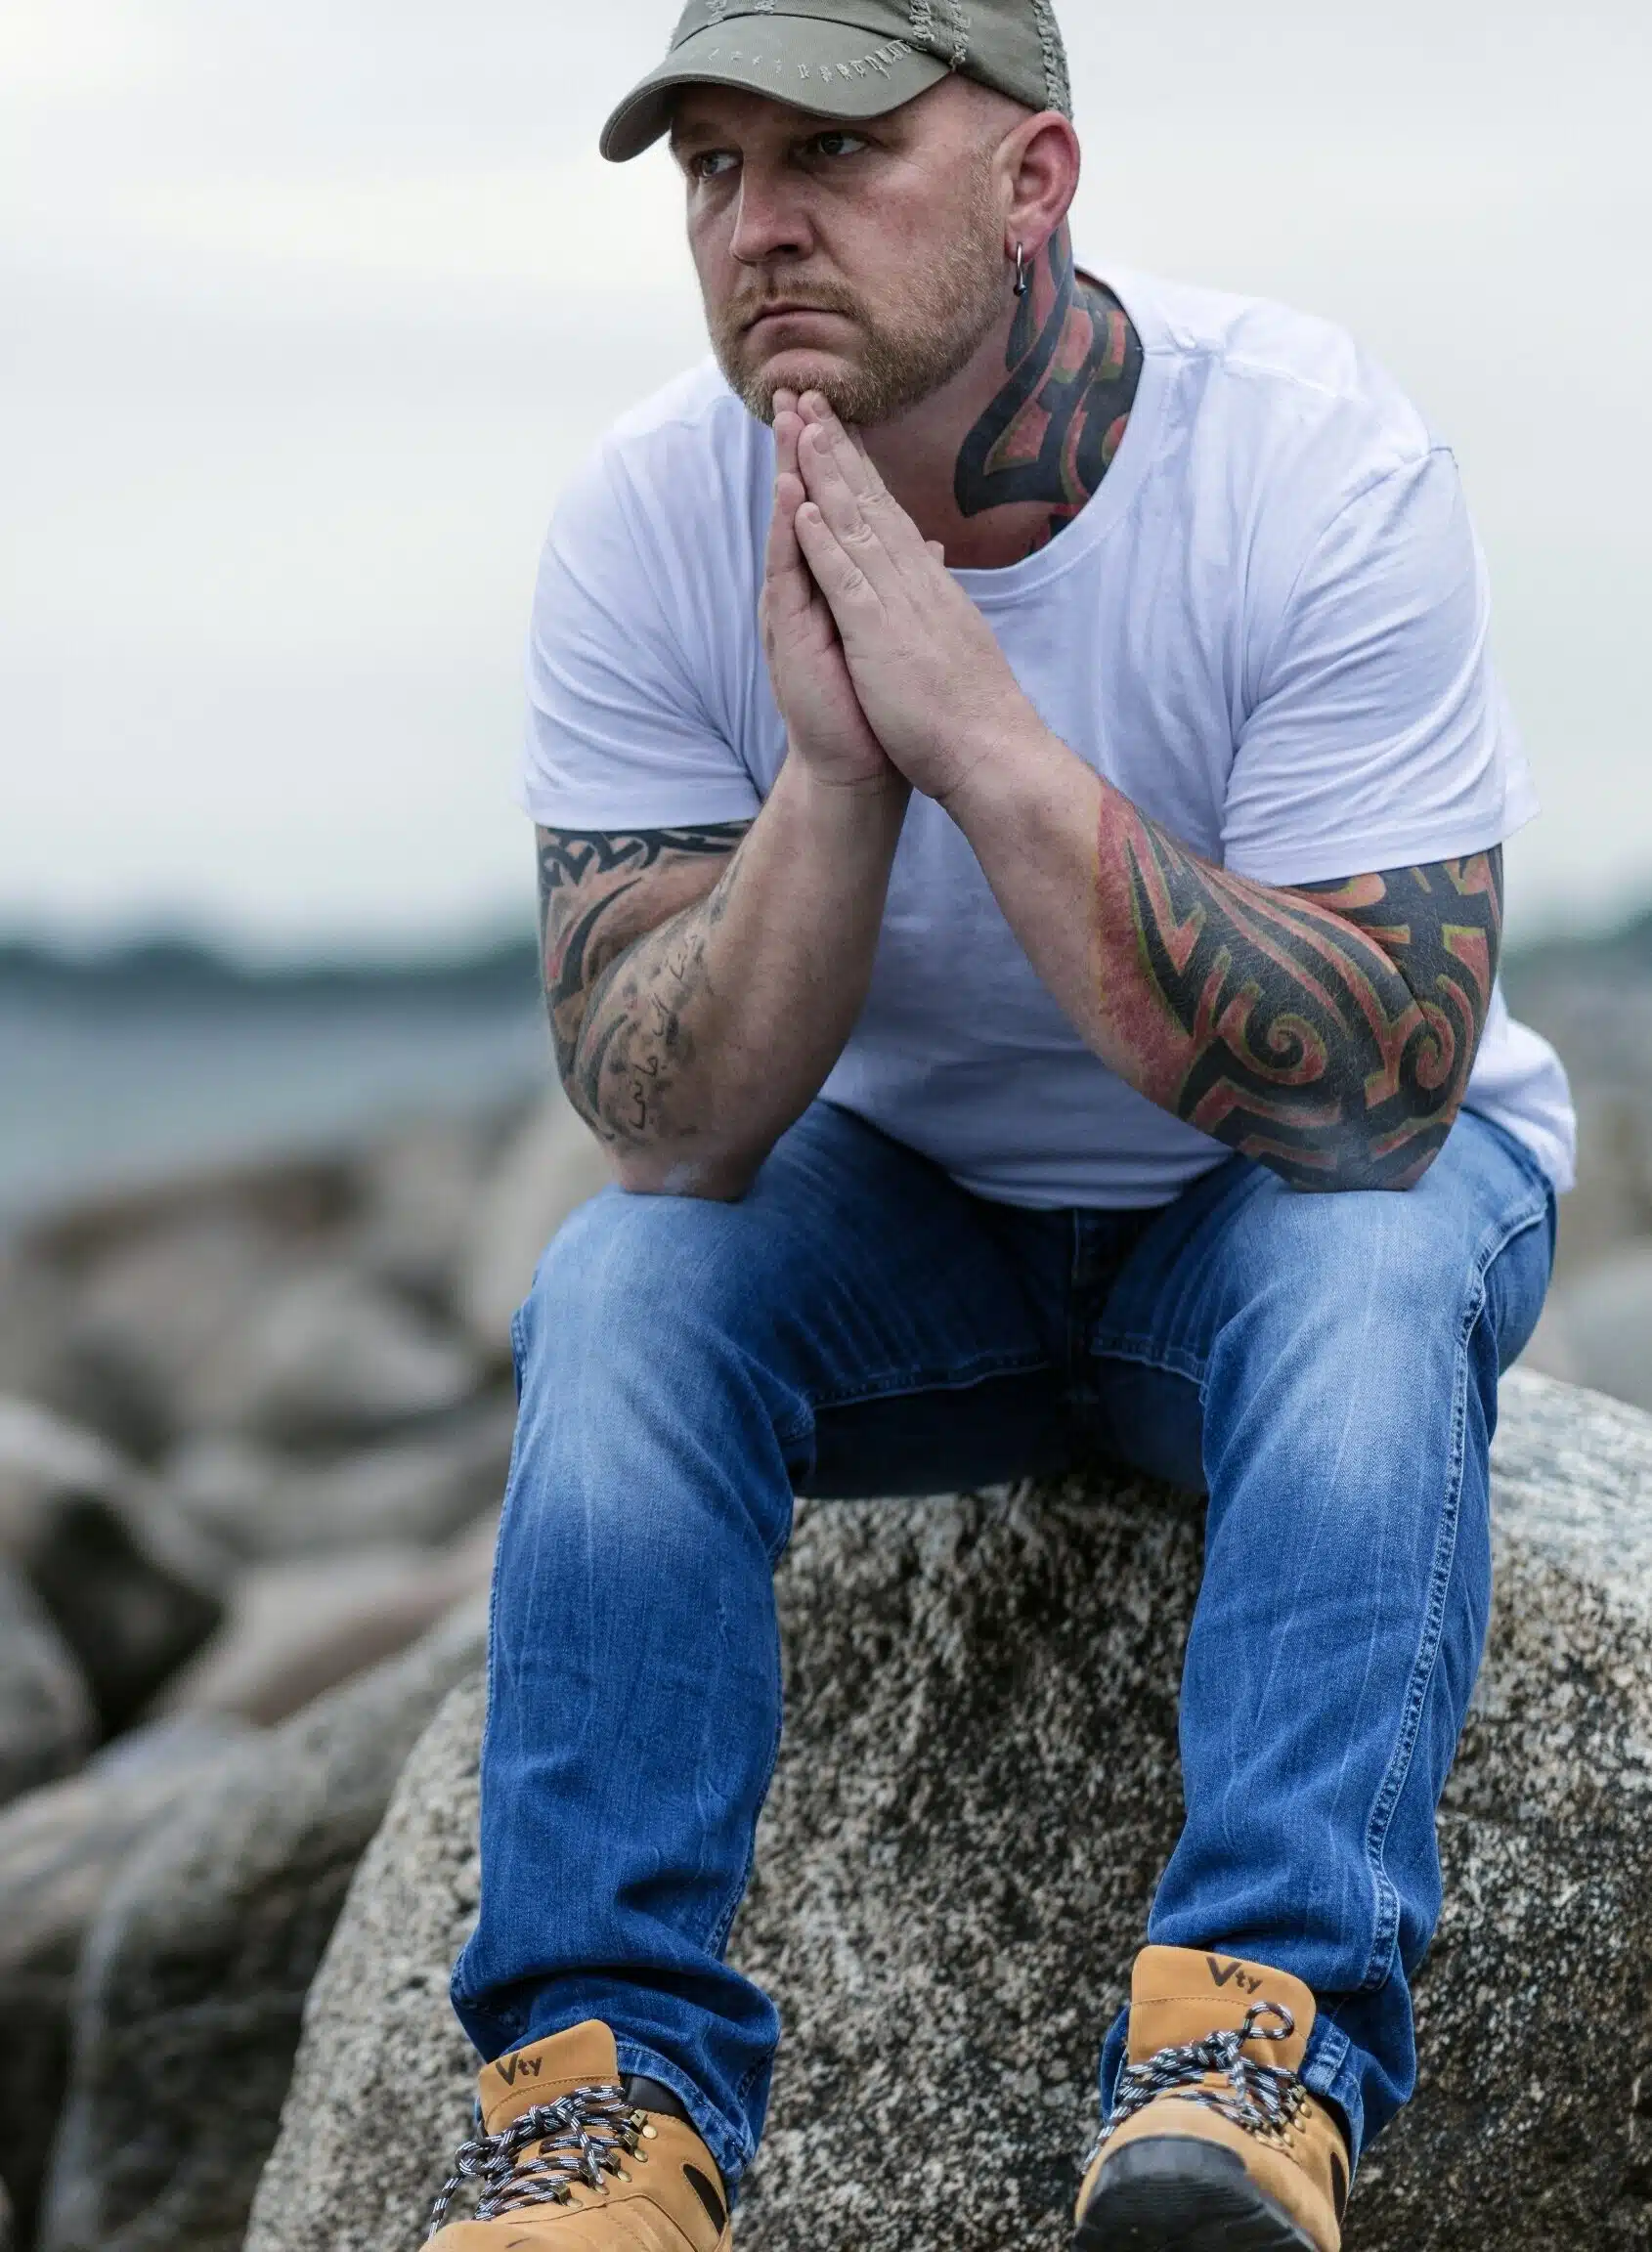 Post's photo of man with tattoos sitting on a rock by the water in prayer type of pose with eyes open thinking about online borderline treatment options. Solemn, flat facial expression.